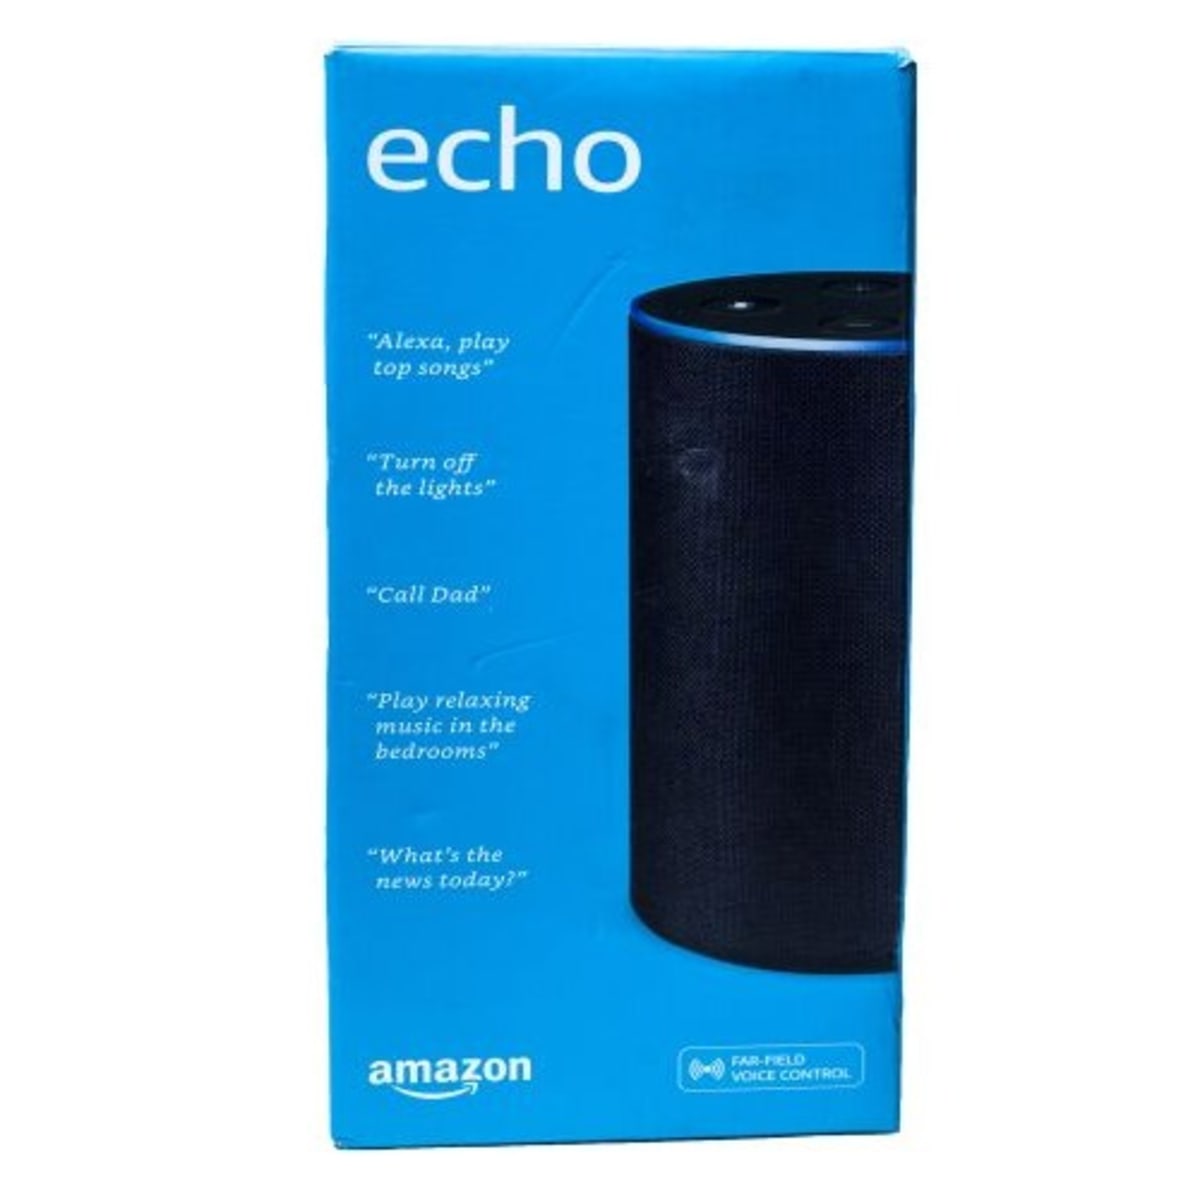  Echo (2nd Generation) - Smart speaker with Alexa and